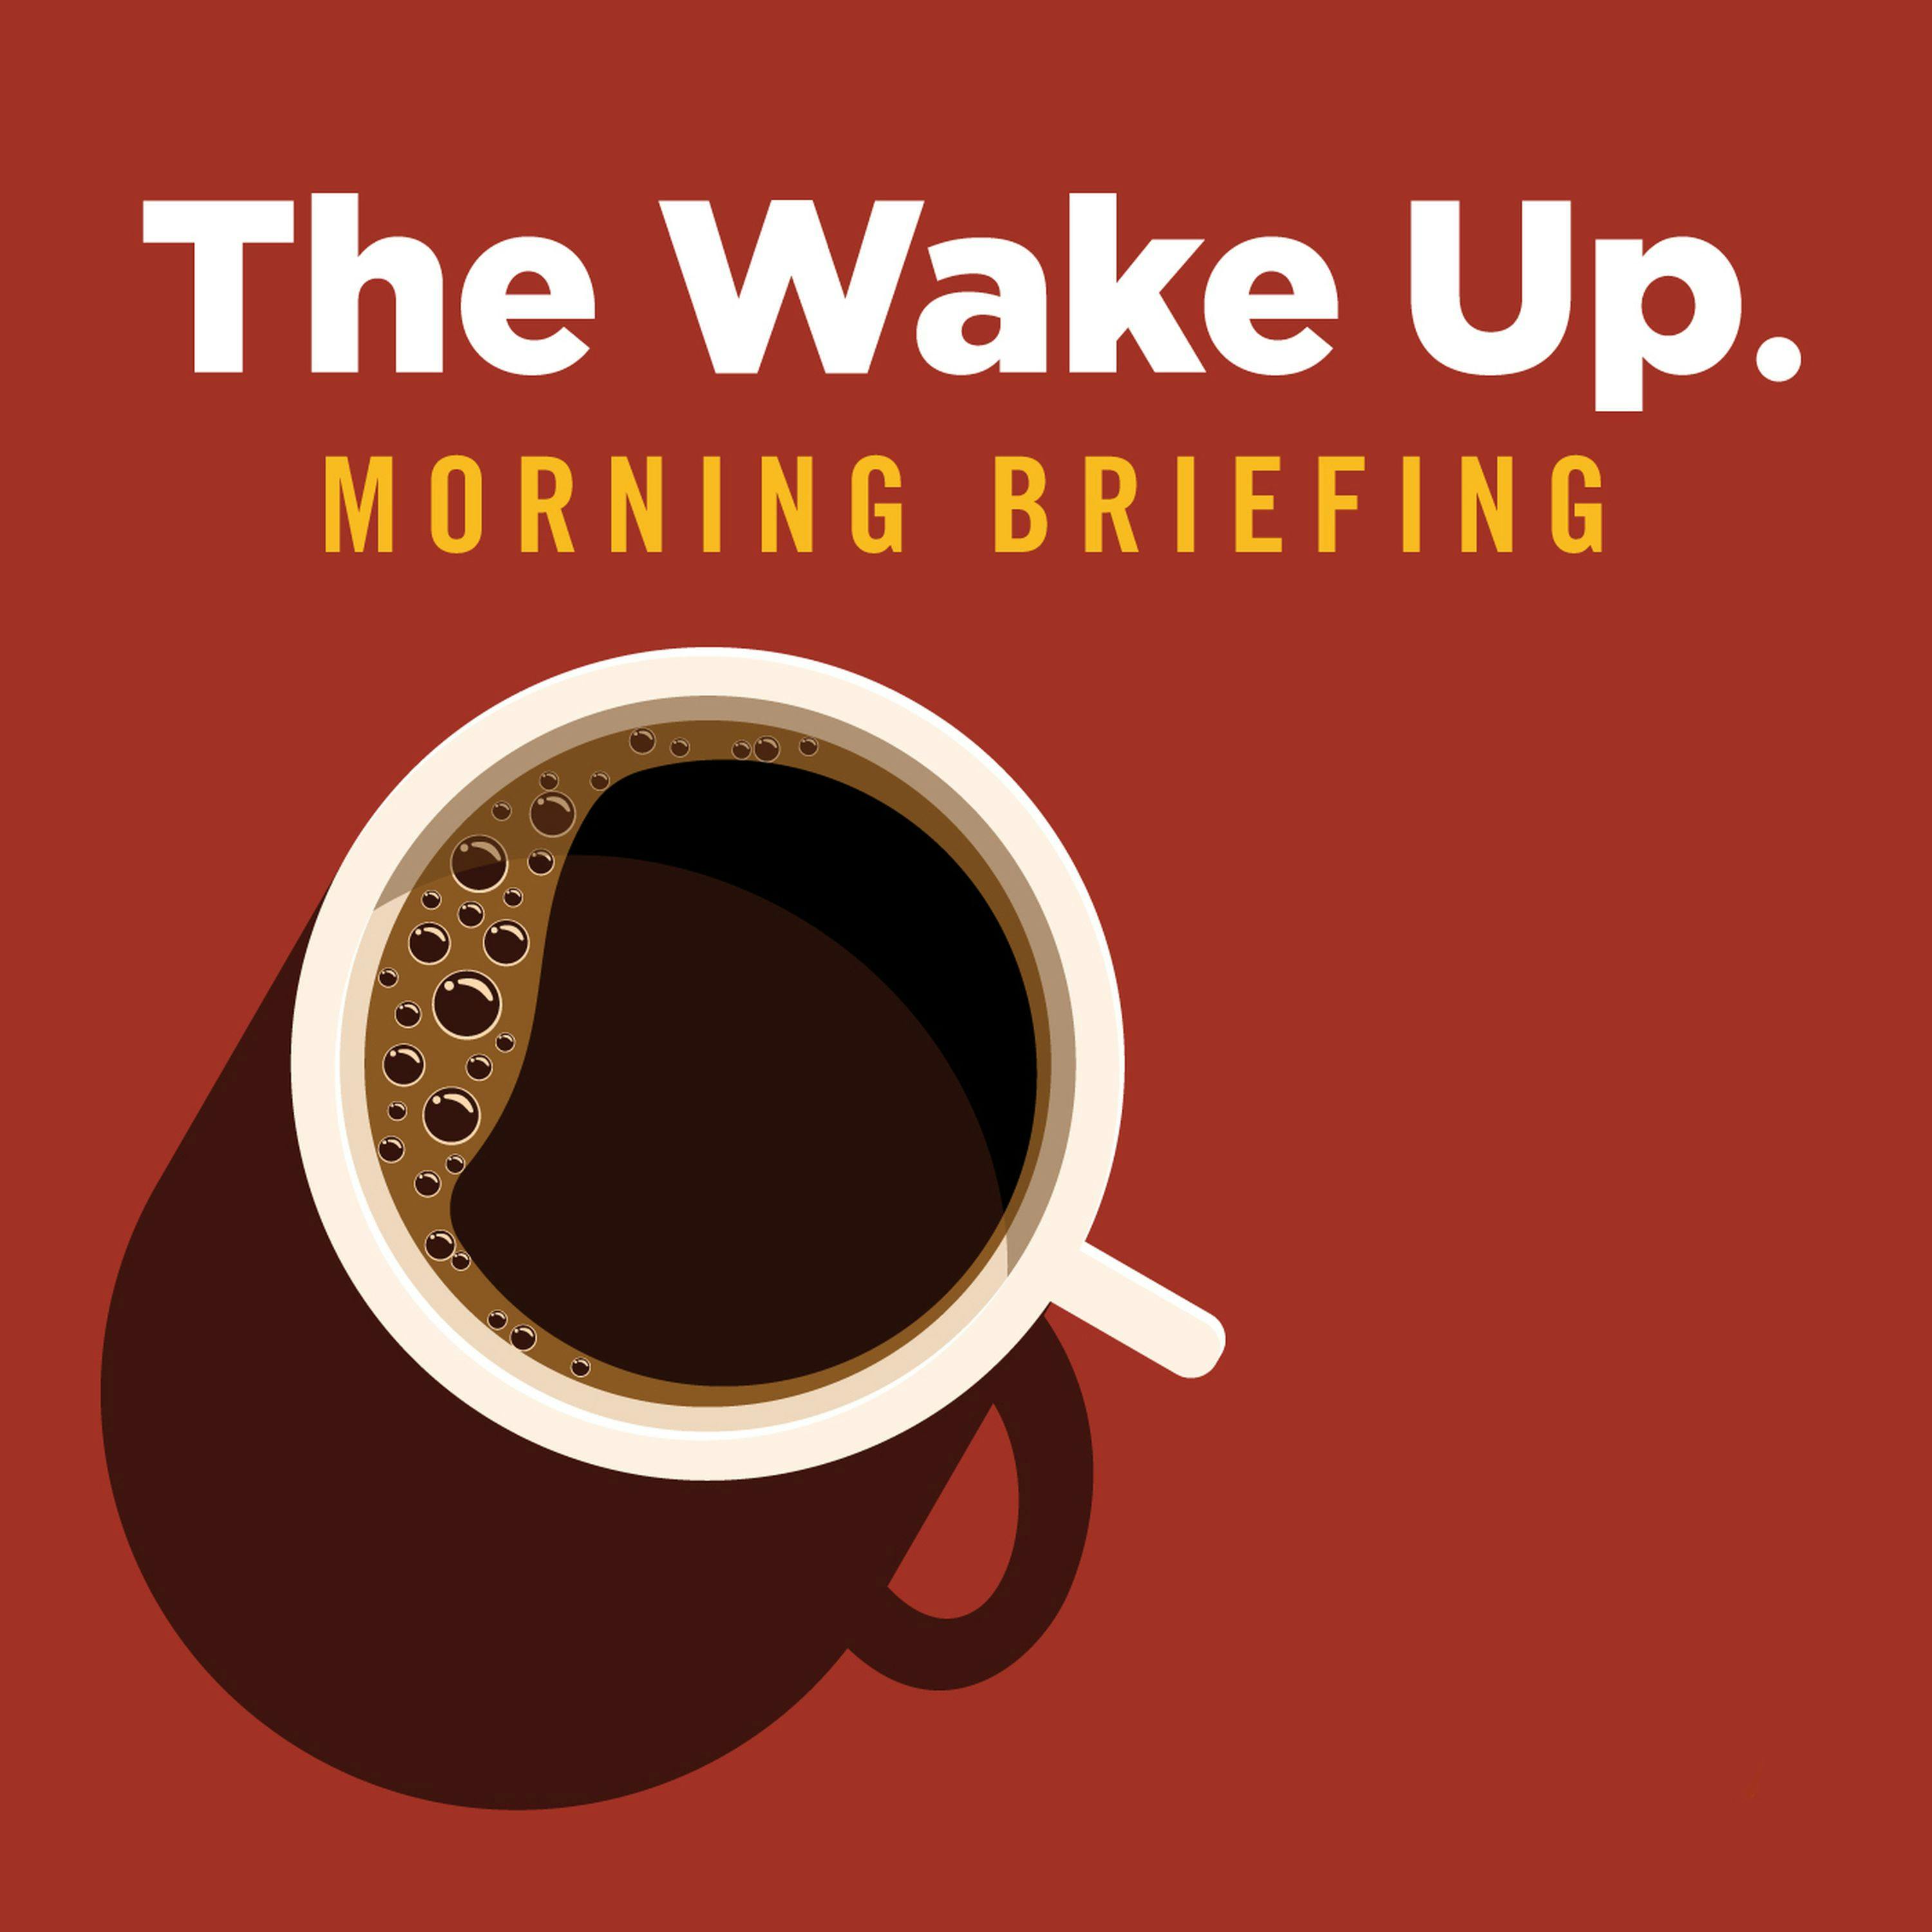 The Wake Up - Oct. 26, 2020 -- Thousands in Cuyahoga County line up on first early voting weekend, and a whopping Ohio coronavirus record